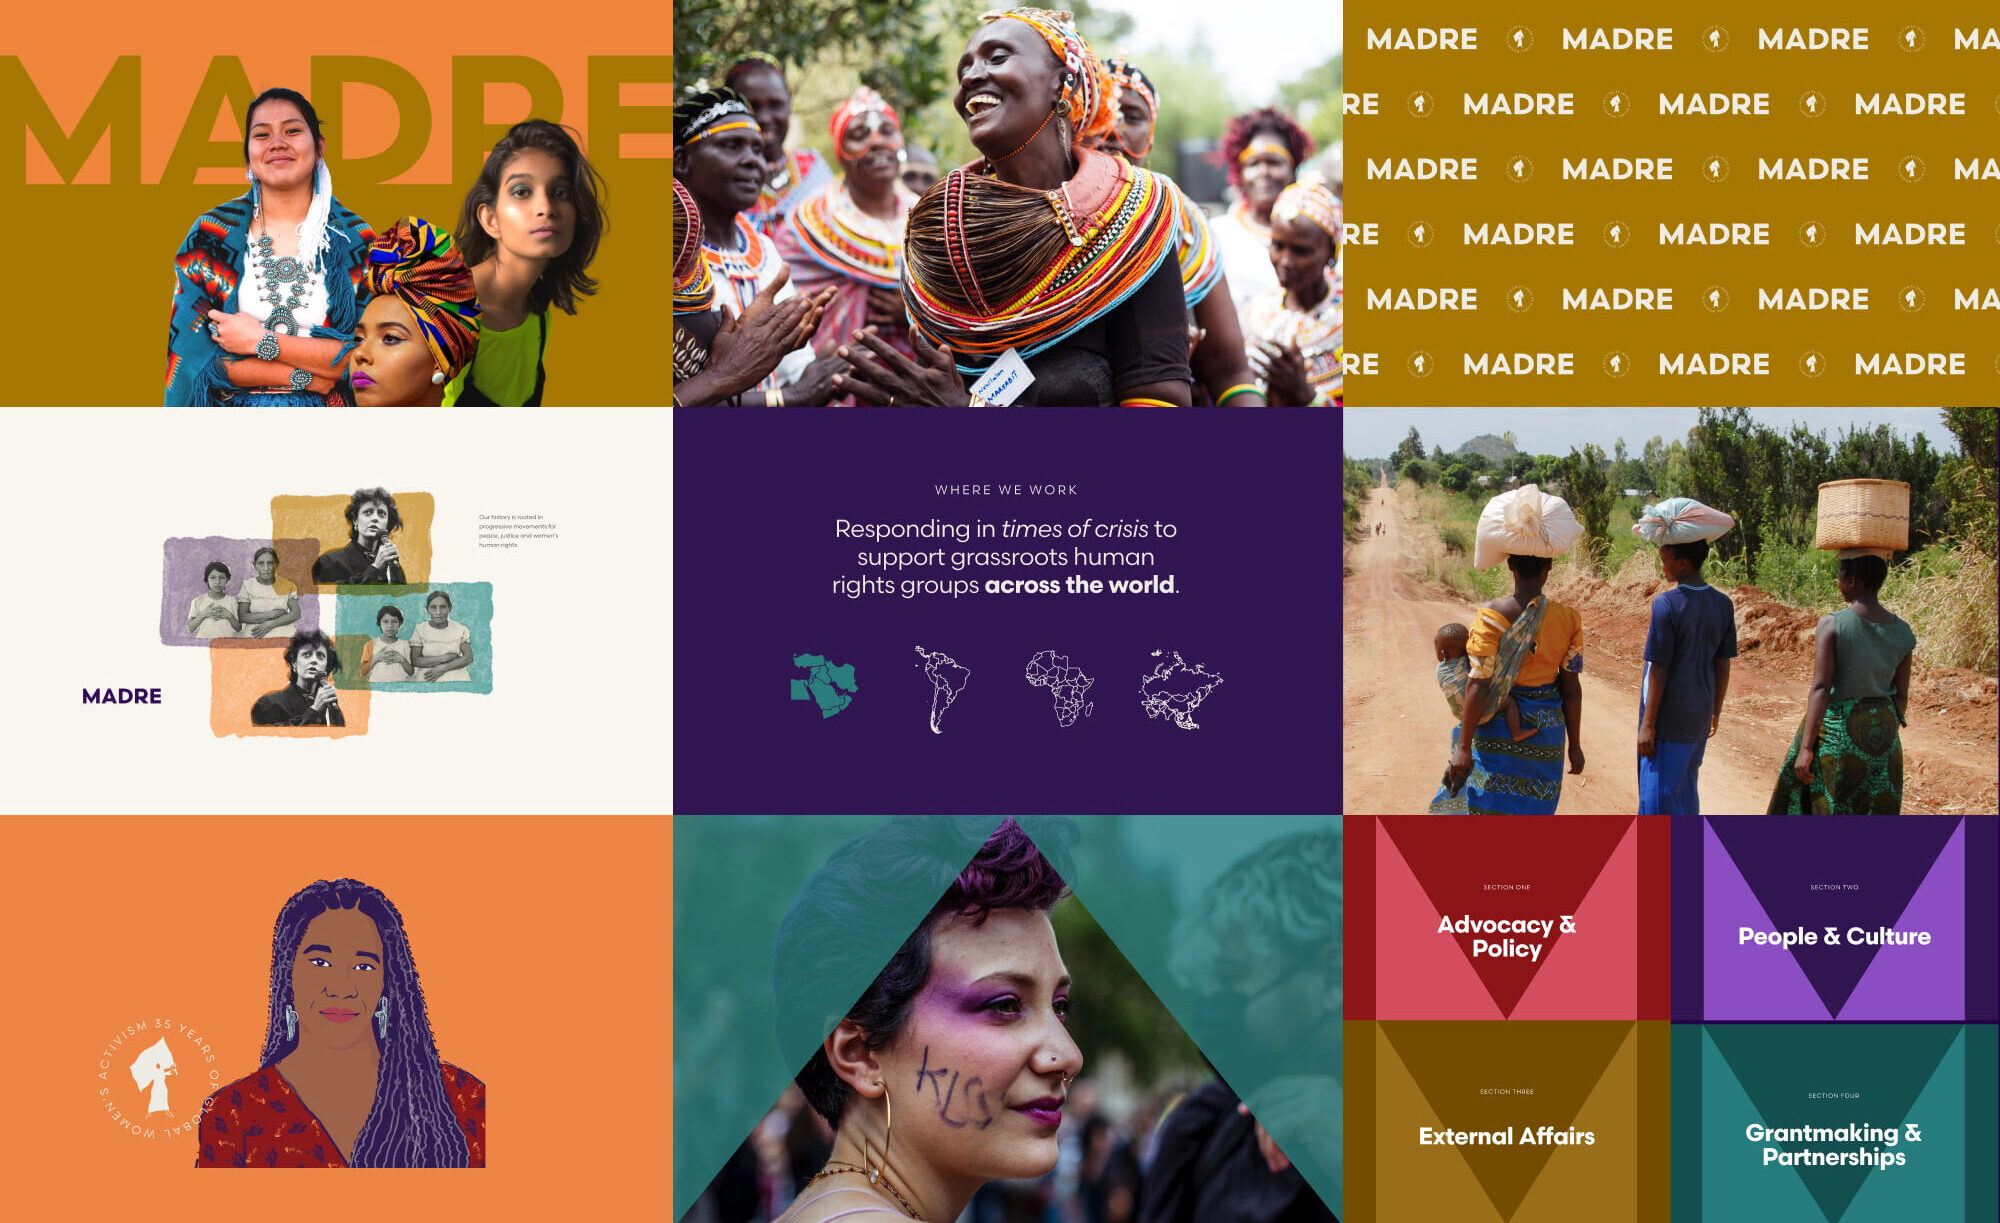 A collage of MADRE design elements features nine rectangles. The first rectangle features the MADRE logo and three women of color, one of Indigenous descent, one of African descent, and one of Indian descent. The second image features a woman of African descent in traditional, colorful clothing laughing and surrounded by community. The third image is a pattern of the MADRE logo and a MADRE badge repeated over and over on gold. The fourth image is a collage of black and white historic imagery sitting on top of painted blocks of pastel. The fifth image is dark purple and features a headline plus map graphics of continents across the world. The sixth image features three African women carrying baskets on their heads in colorful clothing walking along a dirt road; one of the woman holds a baby in a fabric carrier on her hip. The seventh image features an illustration of a Black employee at MADRE. The eight image features an androgynous individual with expressive purple makeup and a teal triangle graphic overlayed on her face. The final image features the various colors of MADRE related to different categories including reds for advocacy and policy, purples for people and culture, golds for external affairs, and teals for grantmaking and partnerships.